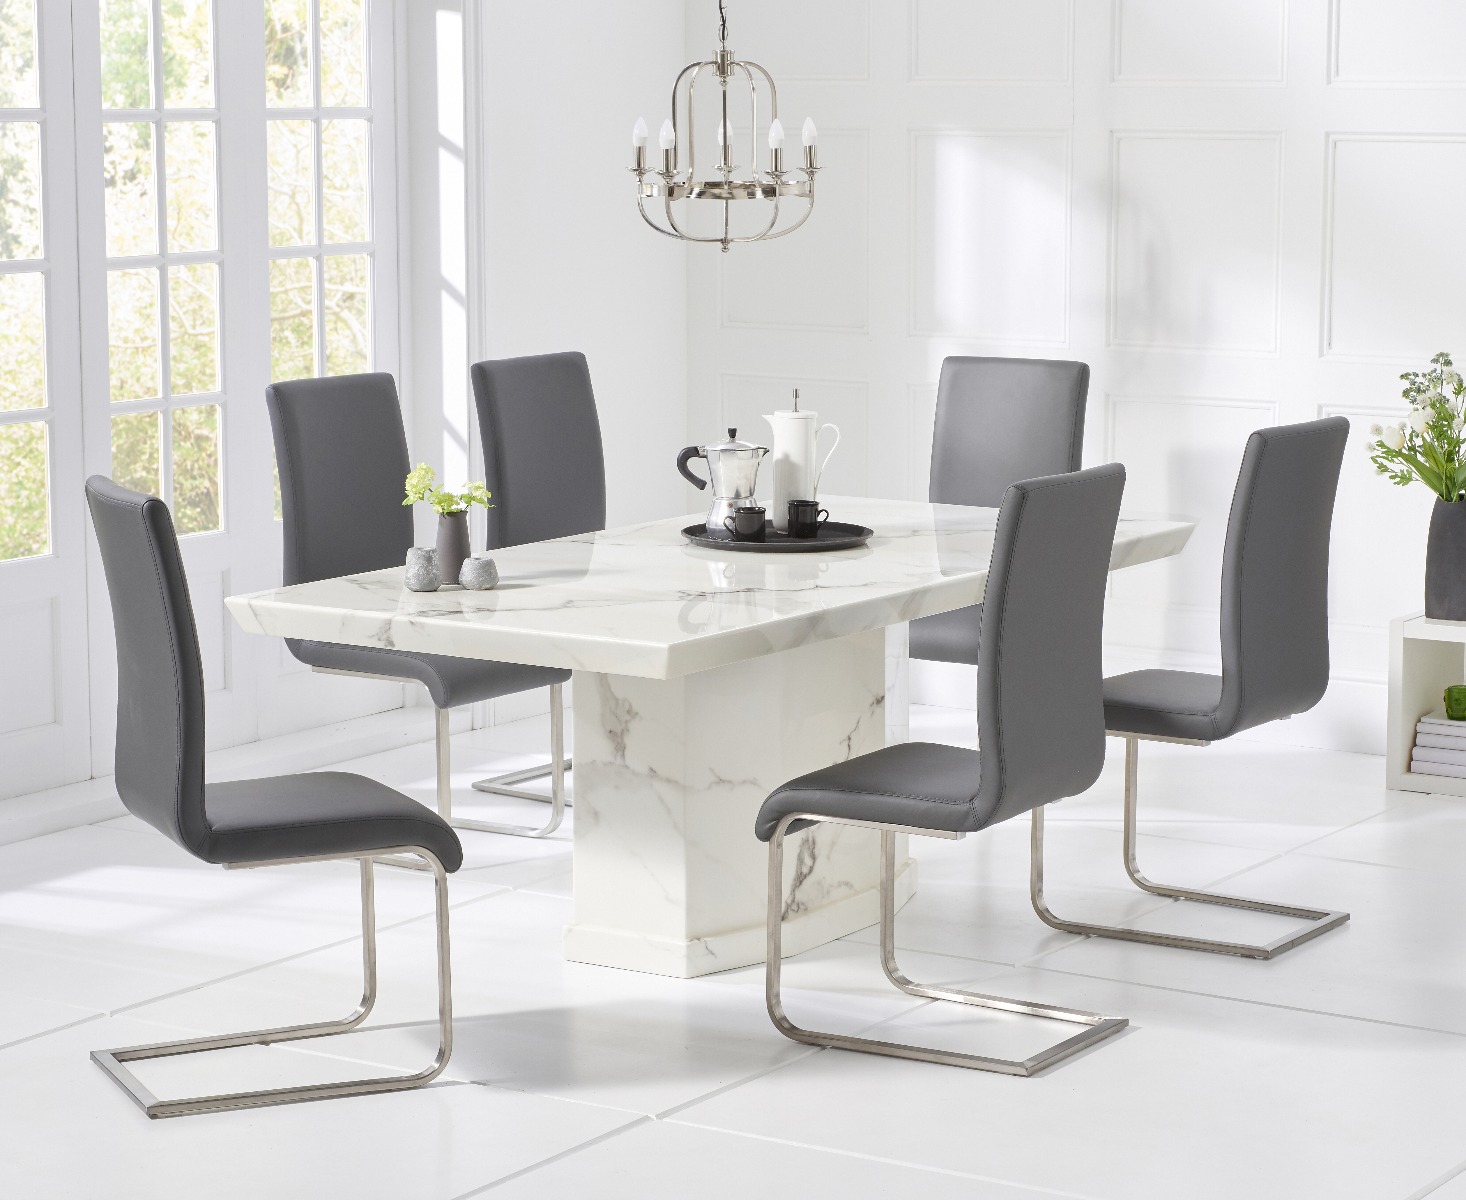 Carvelle 200cm White Pedestal Marble Dining Table With 10 Grey Malaga Chairs